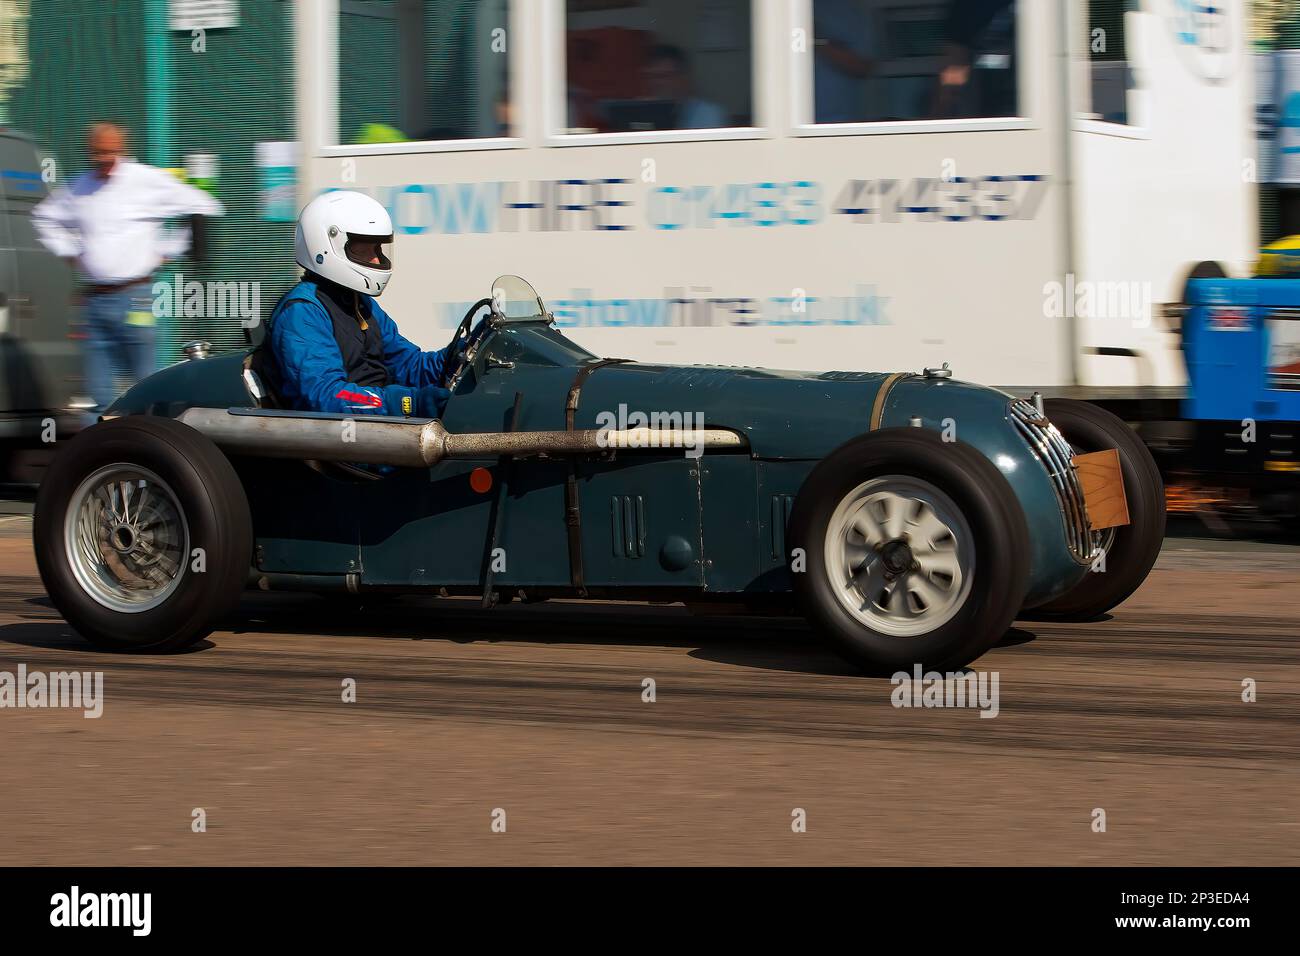 John Potts driving a Alta Norris at The Brighton National Speed Trials 2017. This is the oldest motor racing event in the UK and is held in the south east coastal town of Brighton. Madeira drive is a road which runs along the seafront and is normal full of people explorer the beach, pier and local attractions. Today it is turned in to a 1/4 time trial course. 2nd September 2017 Stock Photo